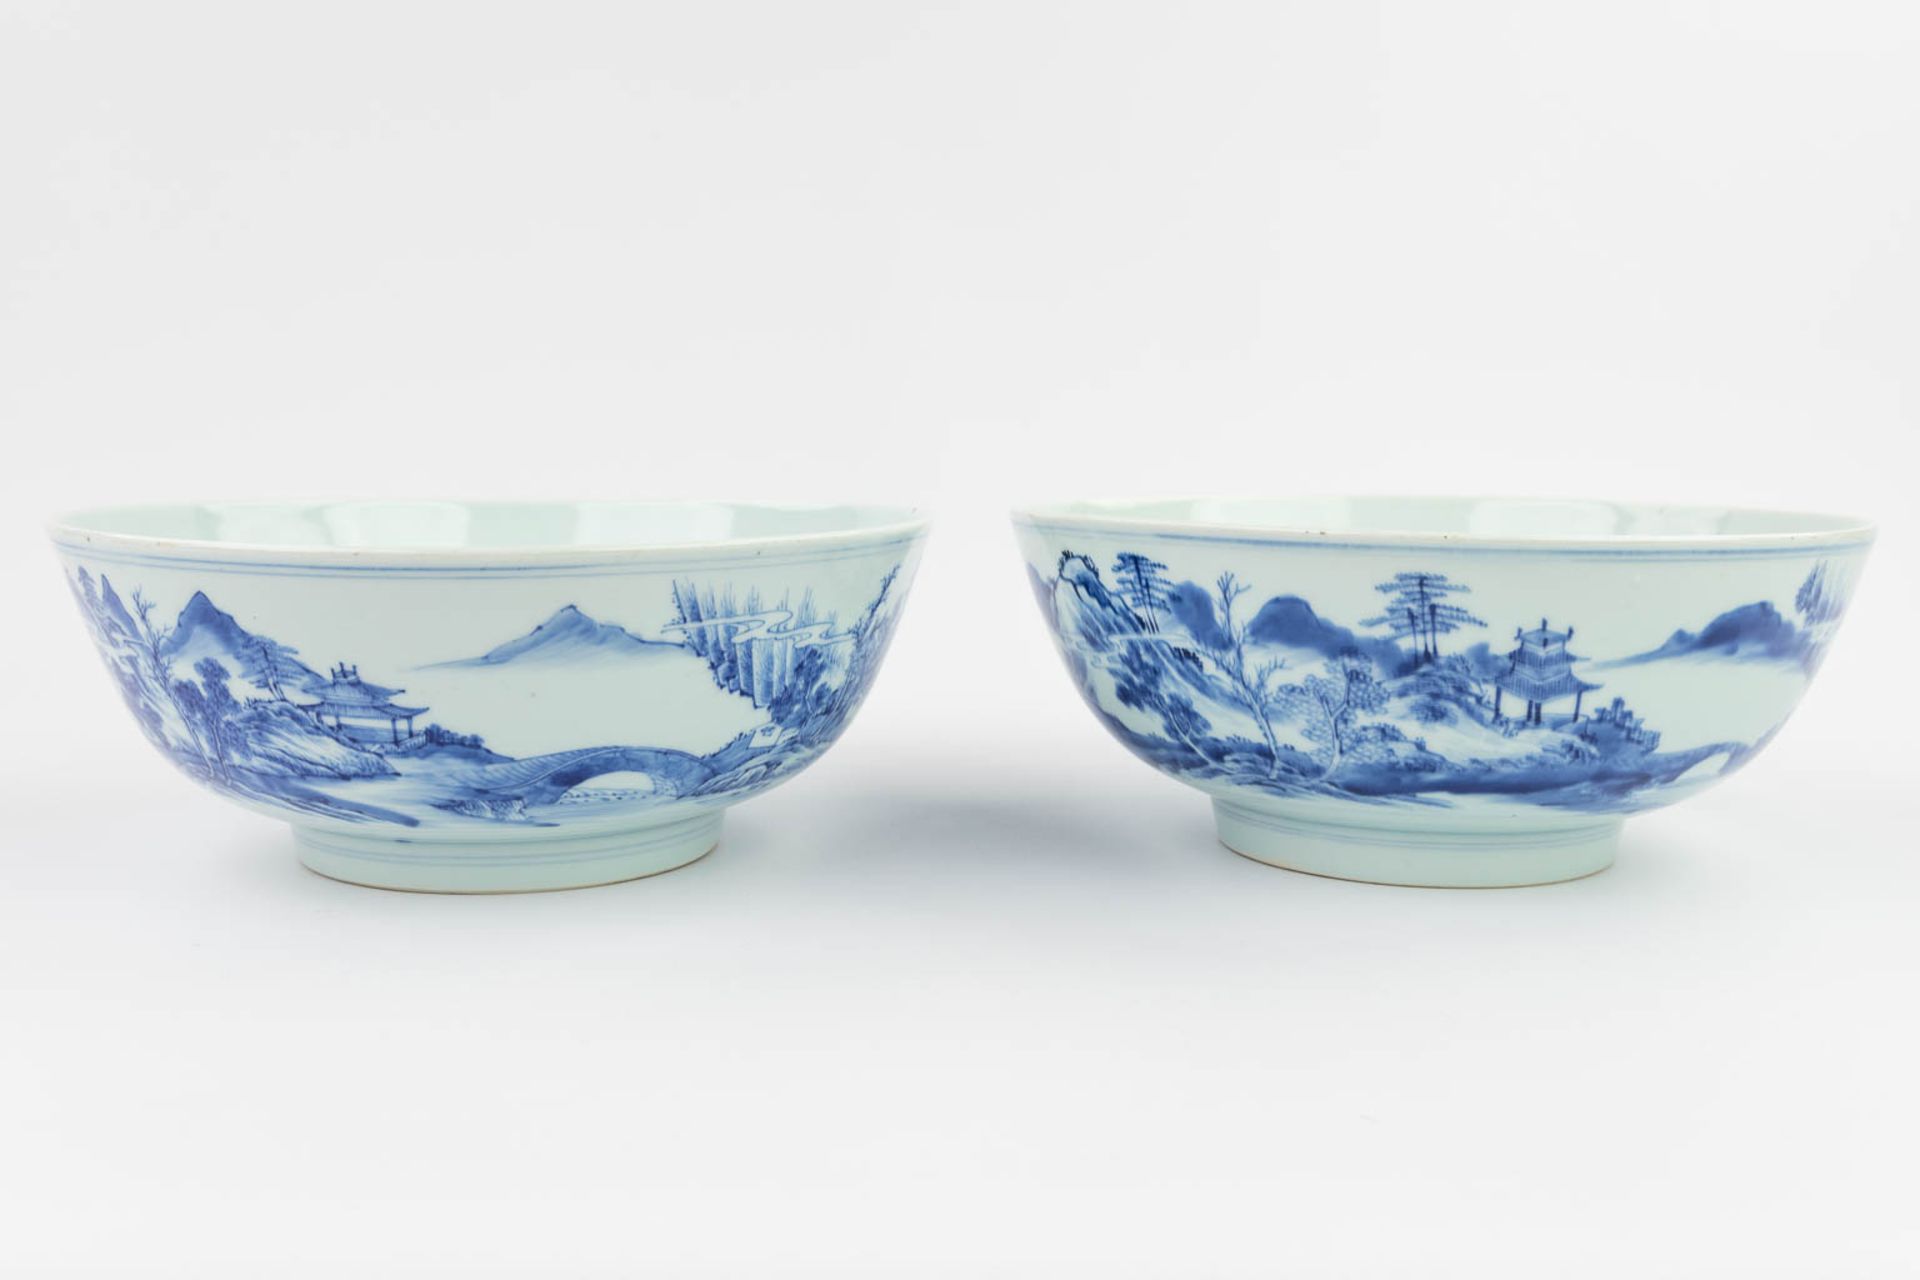 A pair of Chinese bowls made of blue-white porcelain. 18th/19th century. (H: 11 x D: 26,5 cm) - Image 2 of 17